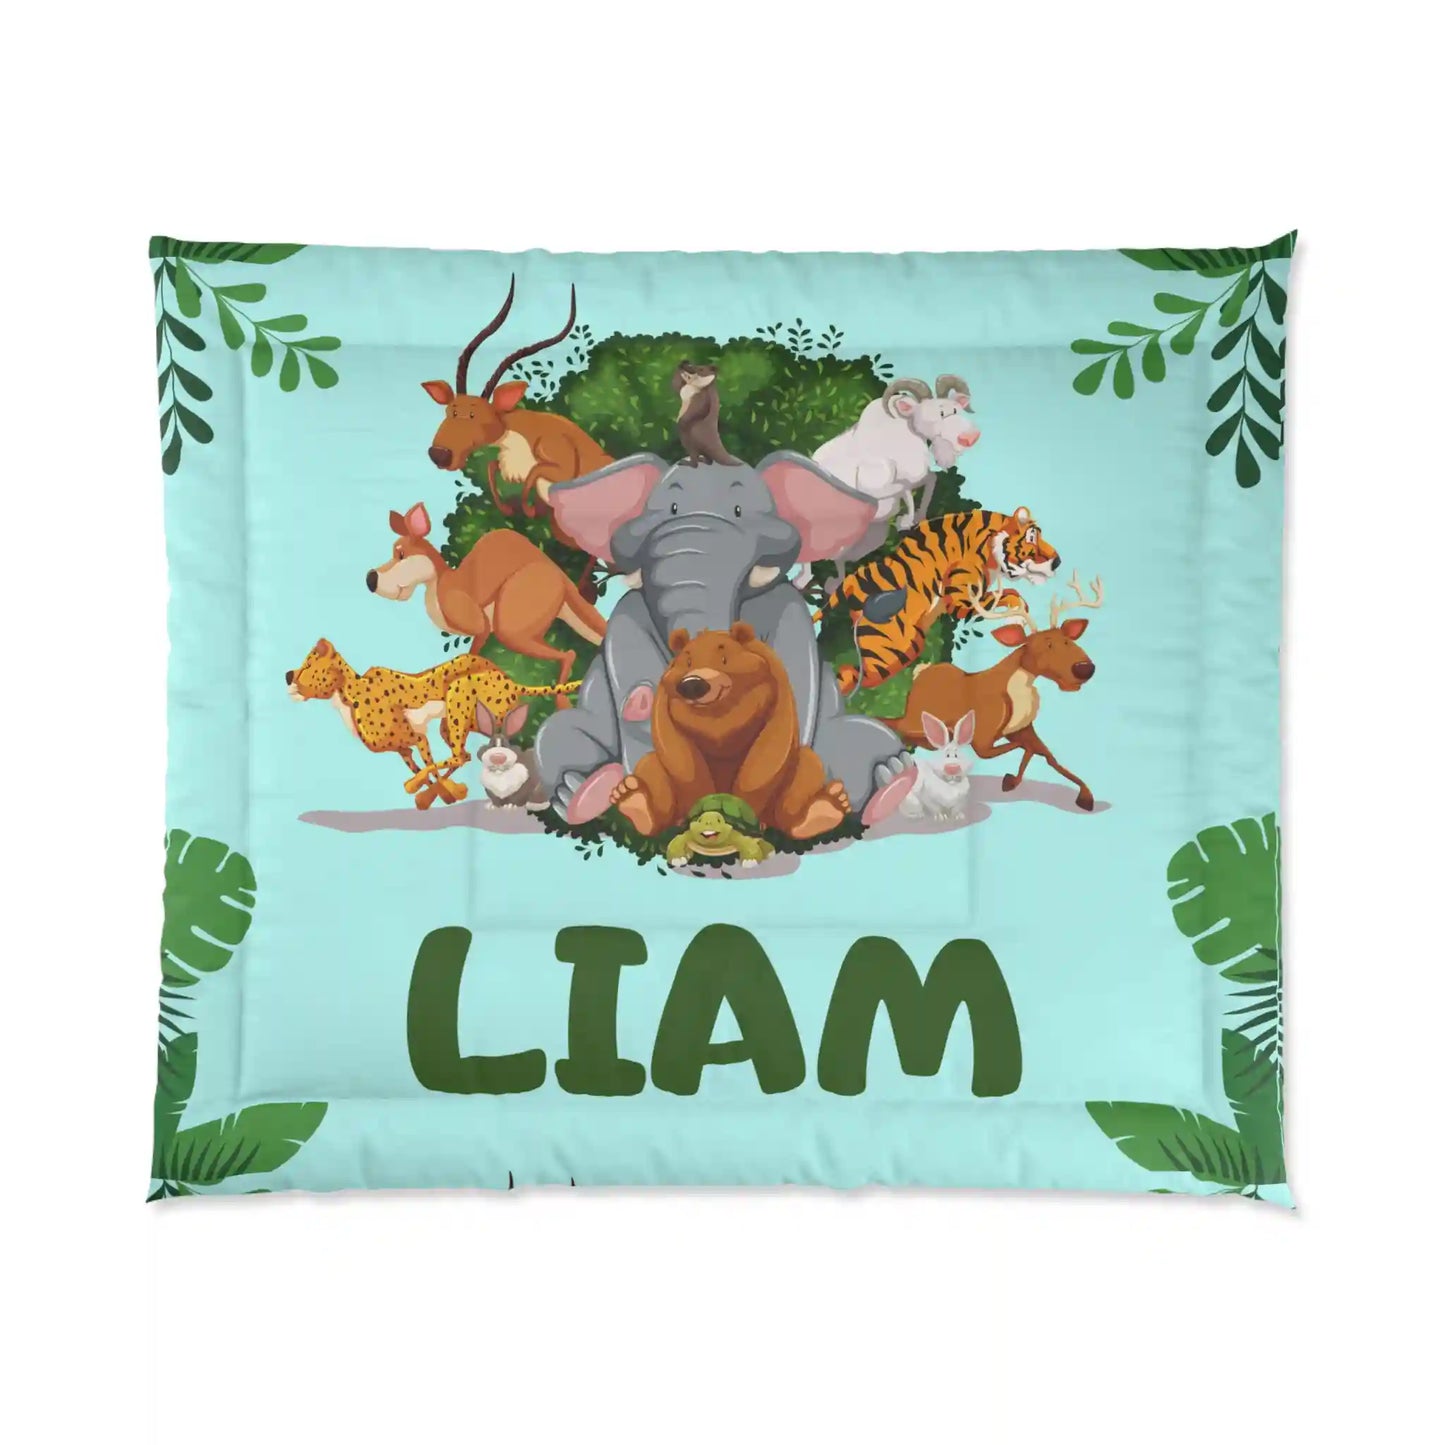 Comforter, quilting, laying, bed quilt (Liam) - Personalize with your name